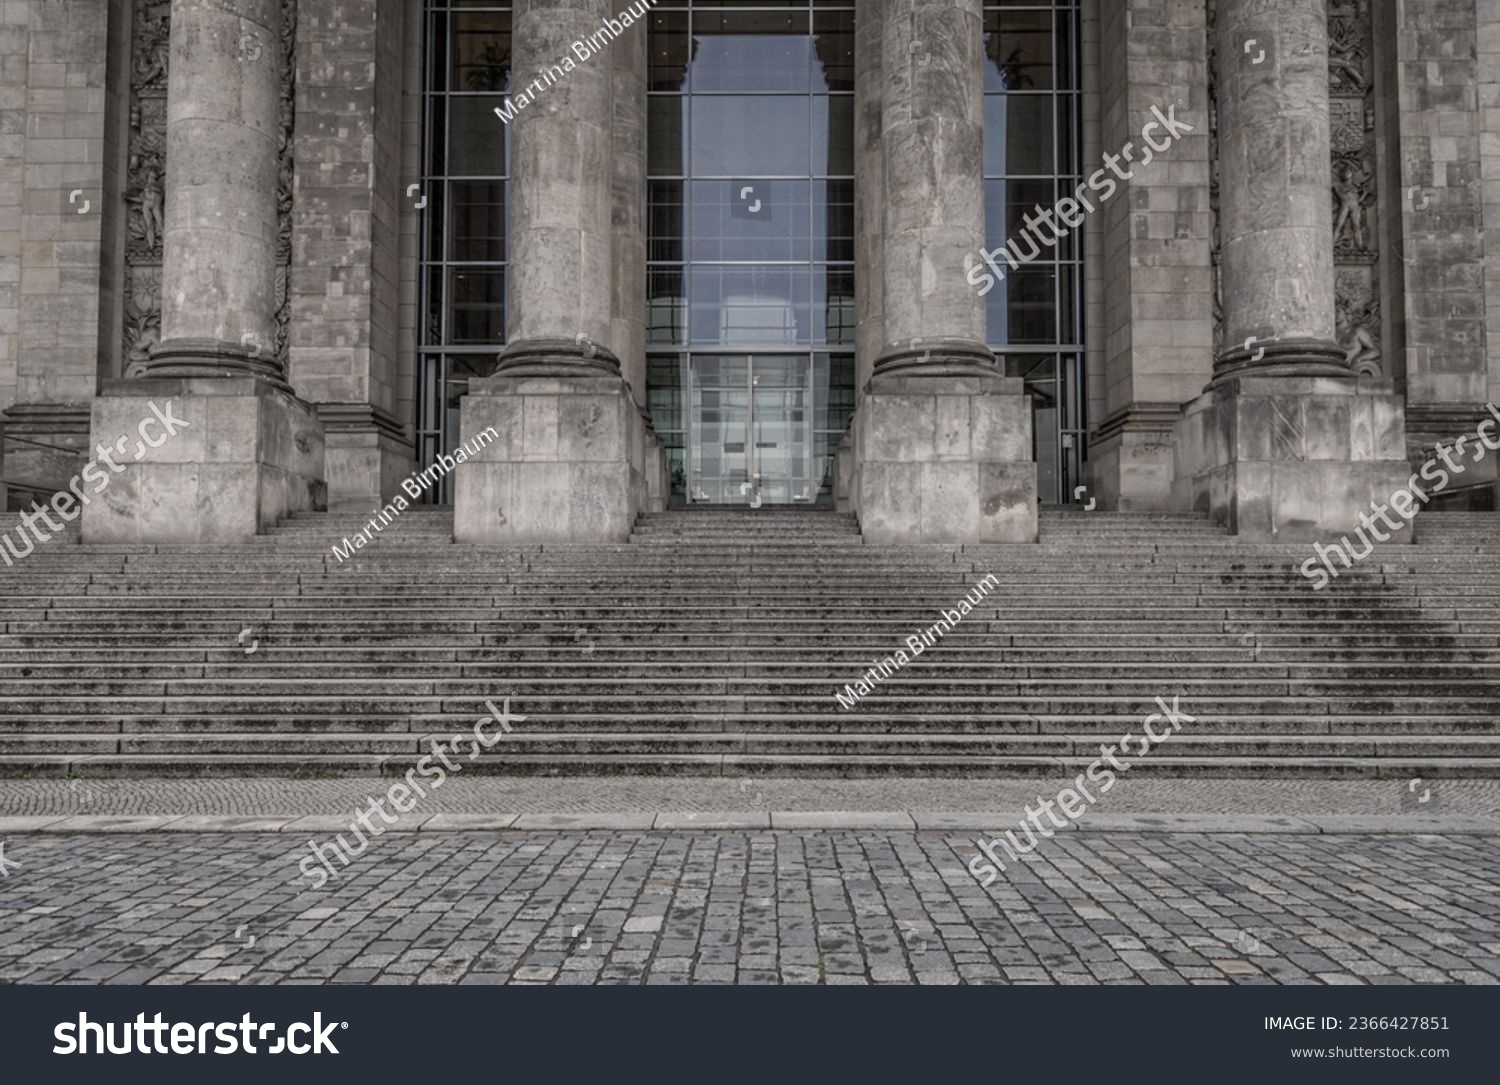 Entrance to the Reichstag building in Berlin, Germany #2366427851